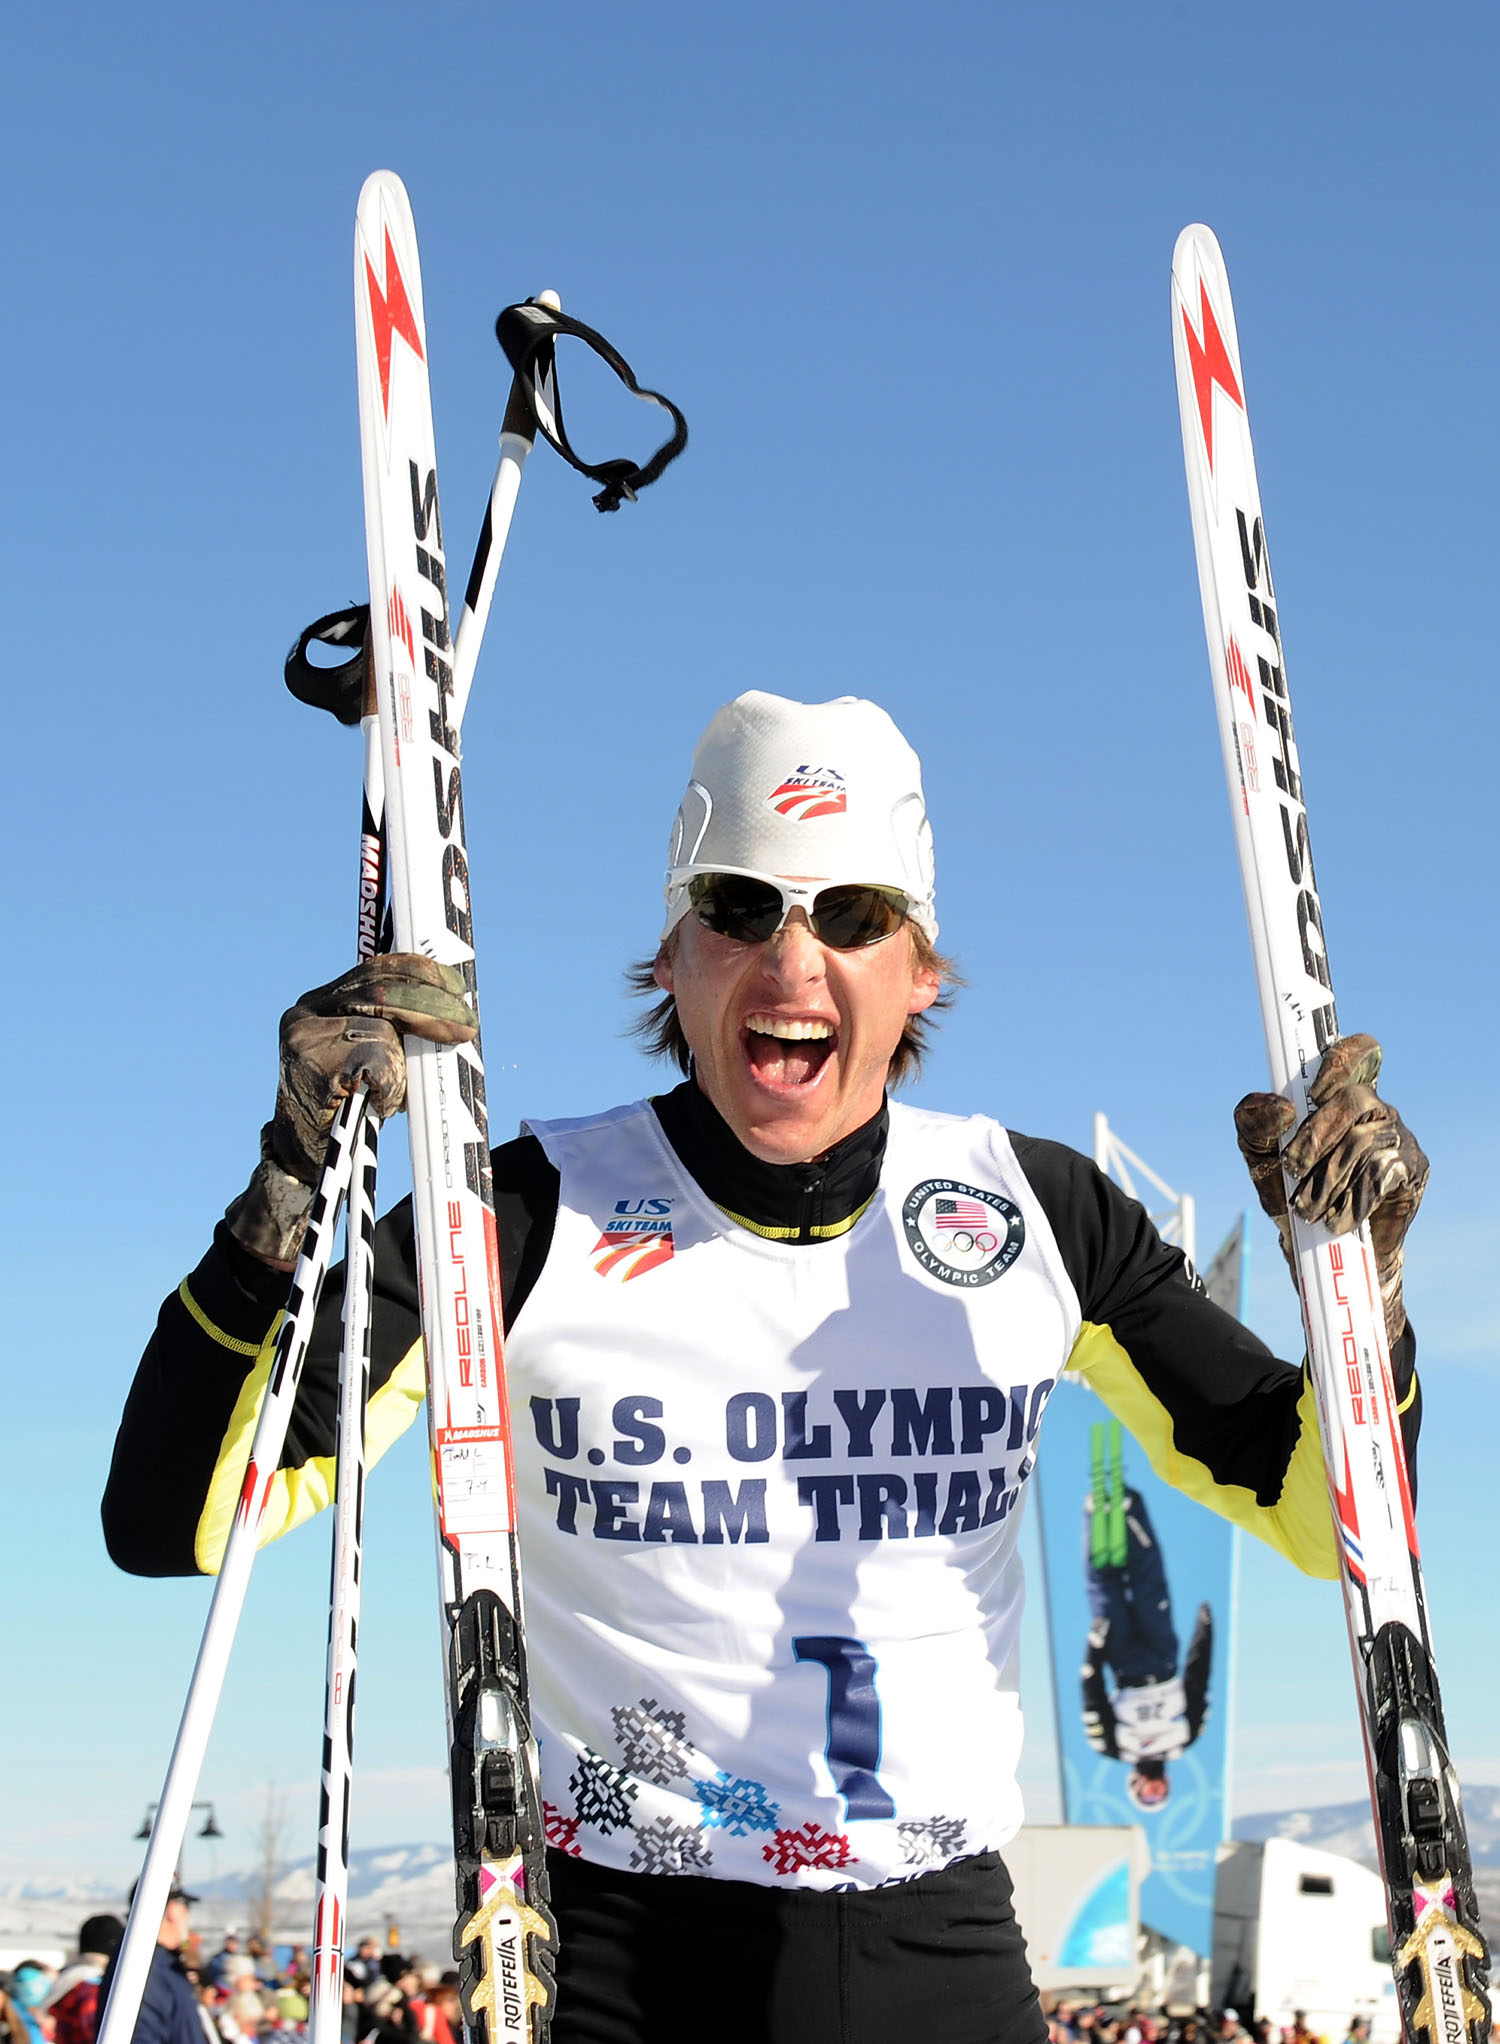 Todd Lodwick celebrates his first place finish in the 10K to secure a place on the United States Olympic team for Sochi 2014 during the Nordic Combined Olympic Trial Dec. 28, 2013 in Park City, Utah. Lodwick was chosen to carry the American flag during the opening ceremony of the 2014 Olympics in Sochi, Russia.